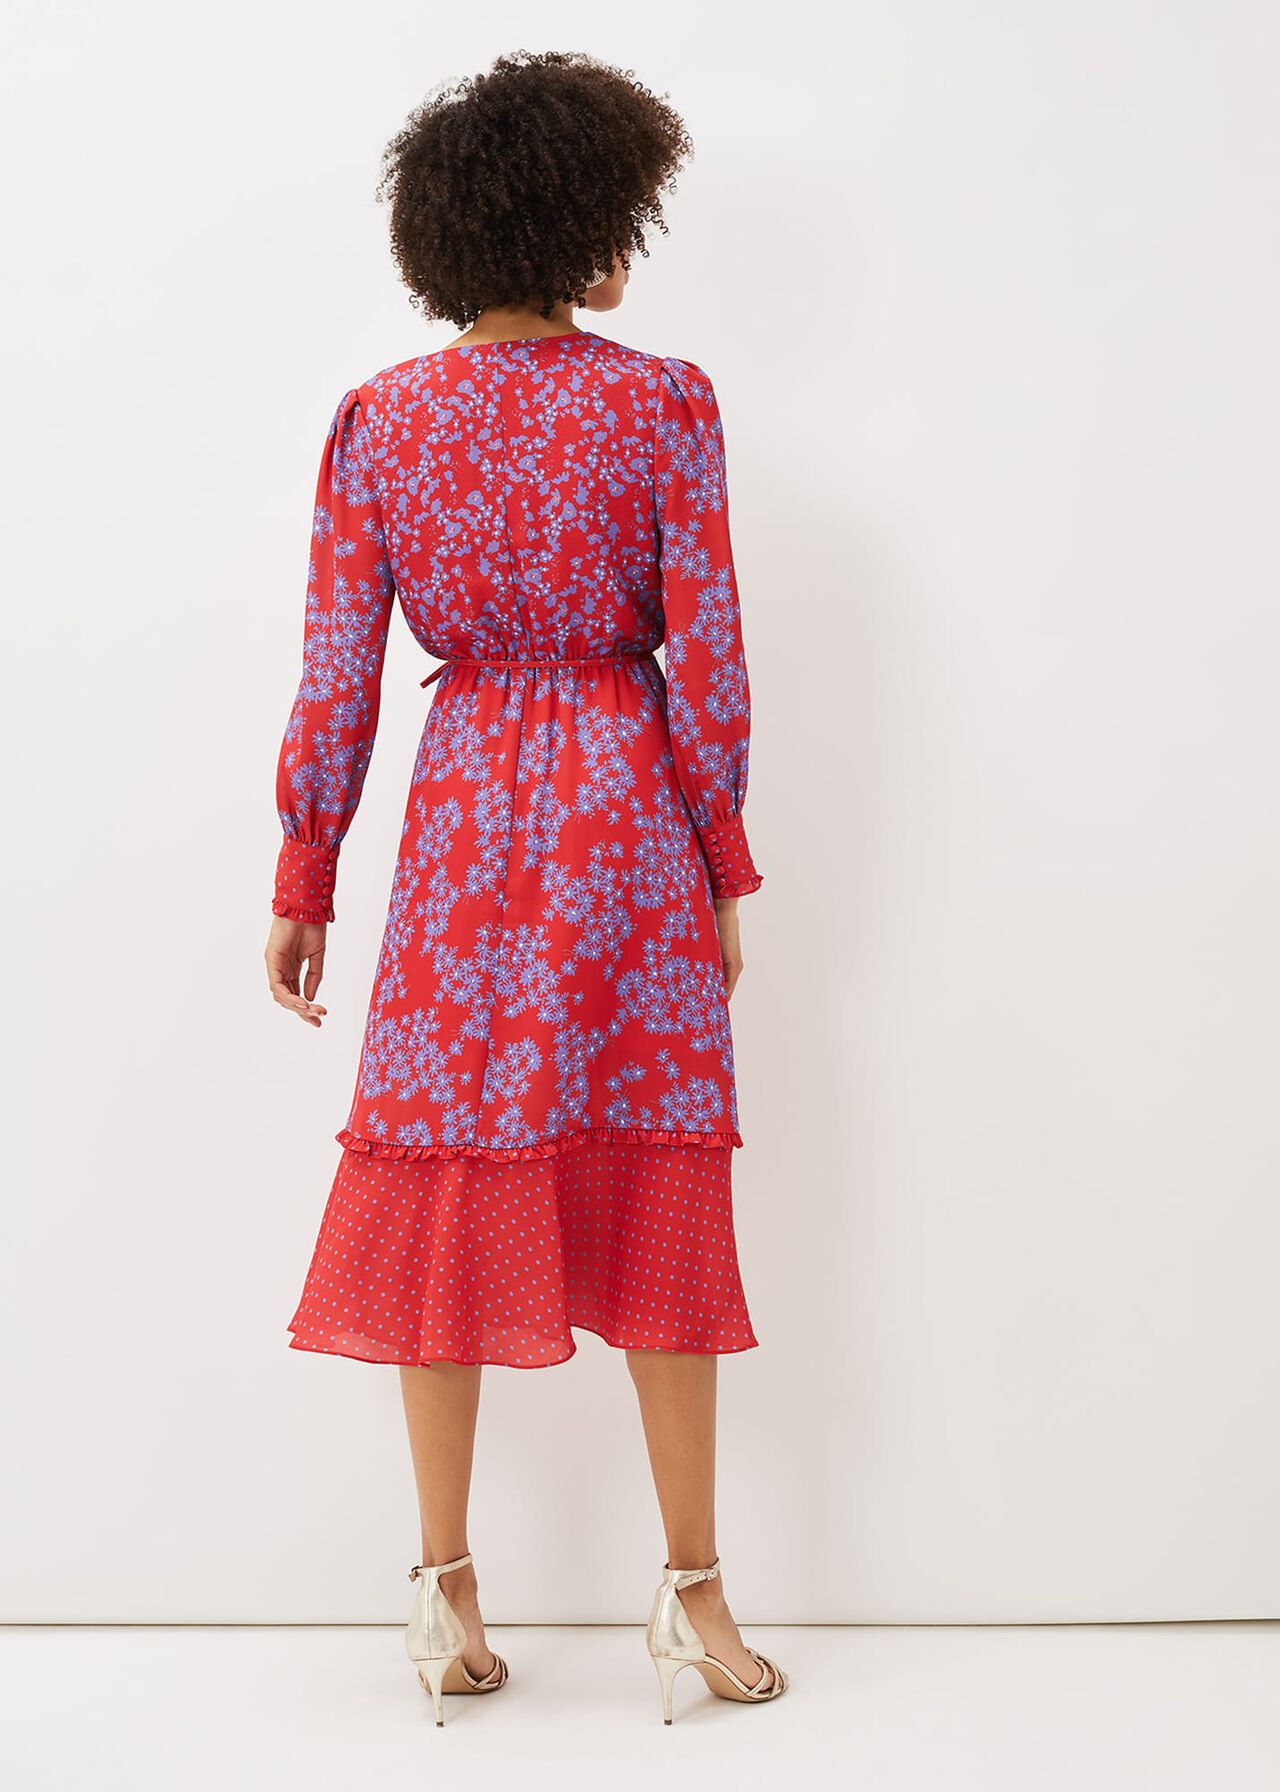 Zahara Floral And Spot Print Dress | Phase Eight